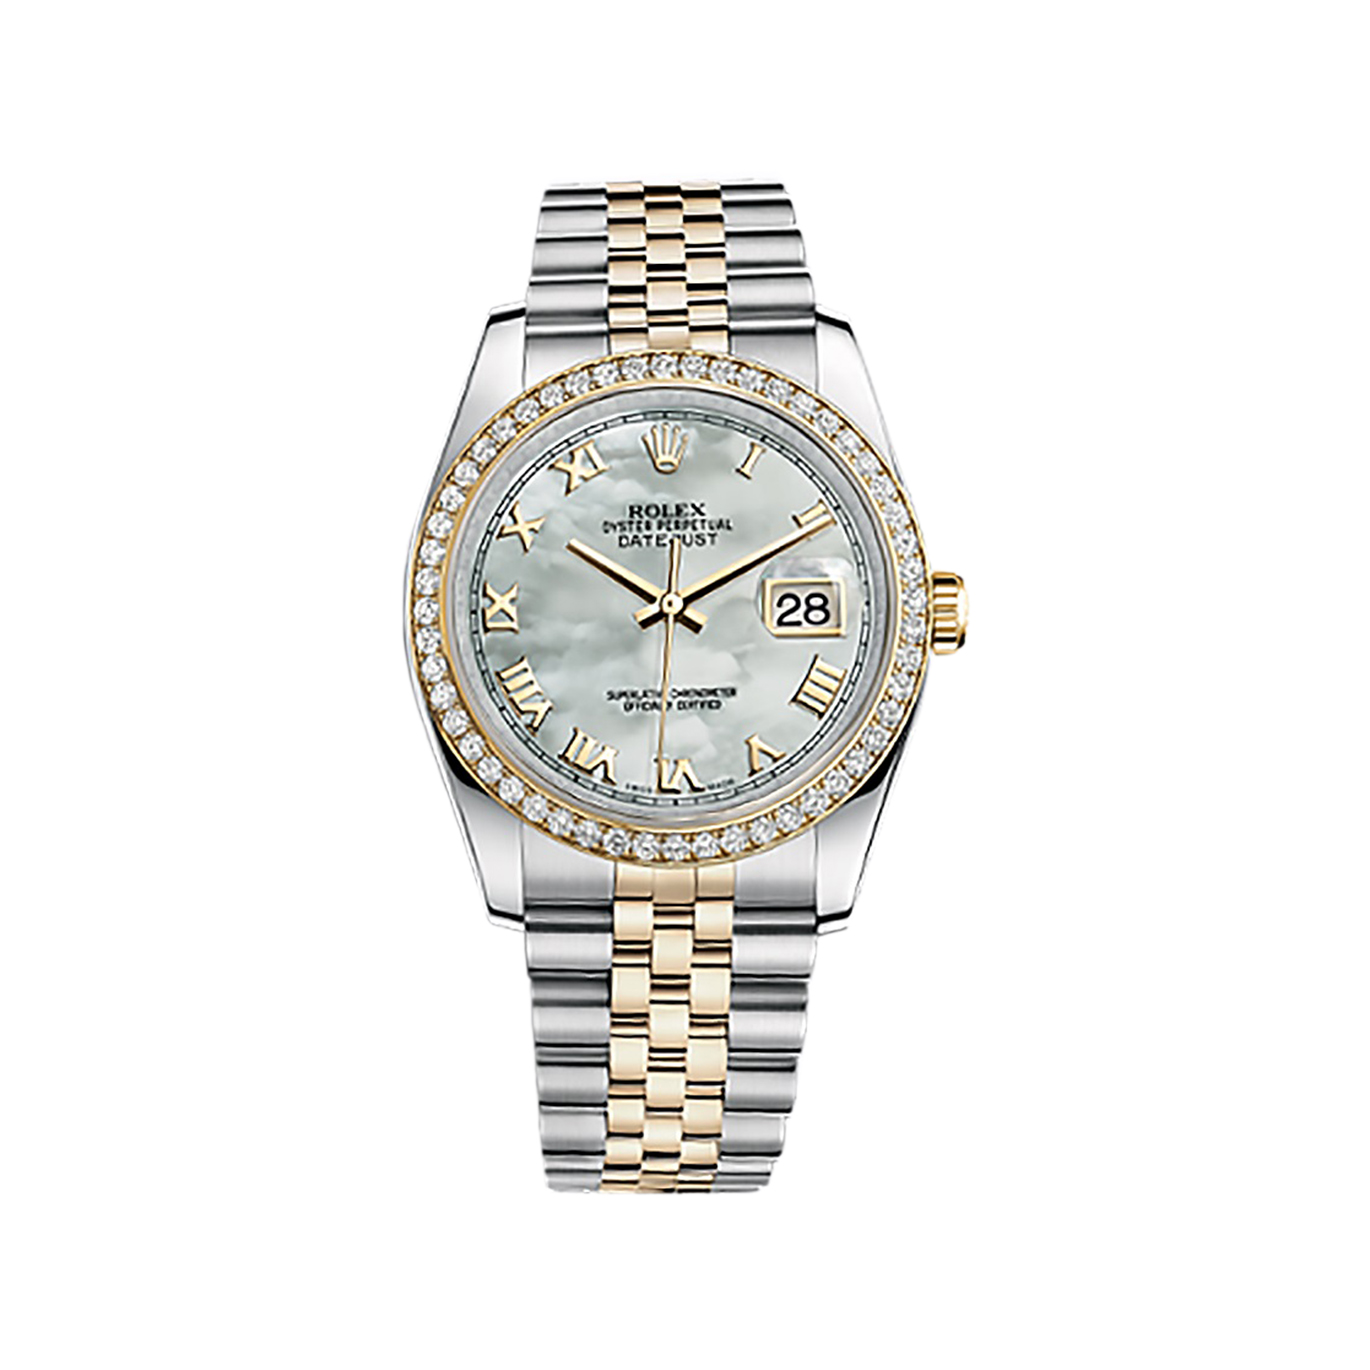 Datejust 36 116243 Gold & Stainless Steel Watch (White Mother-of-Pearl)